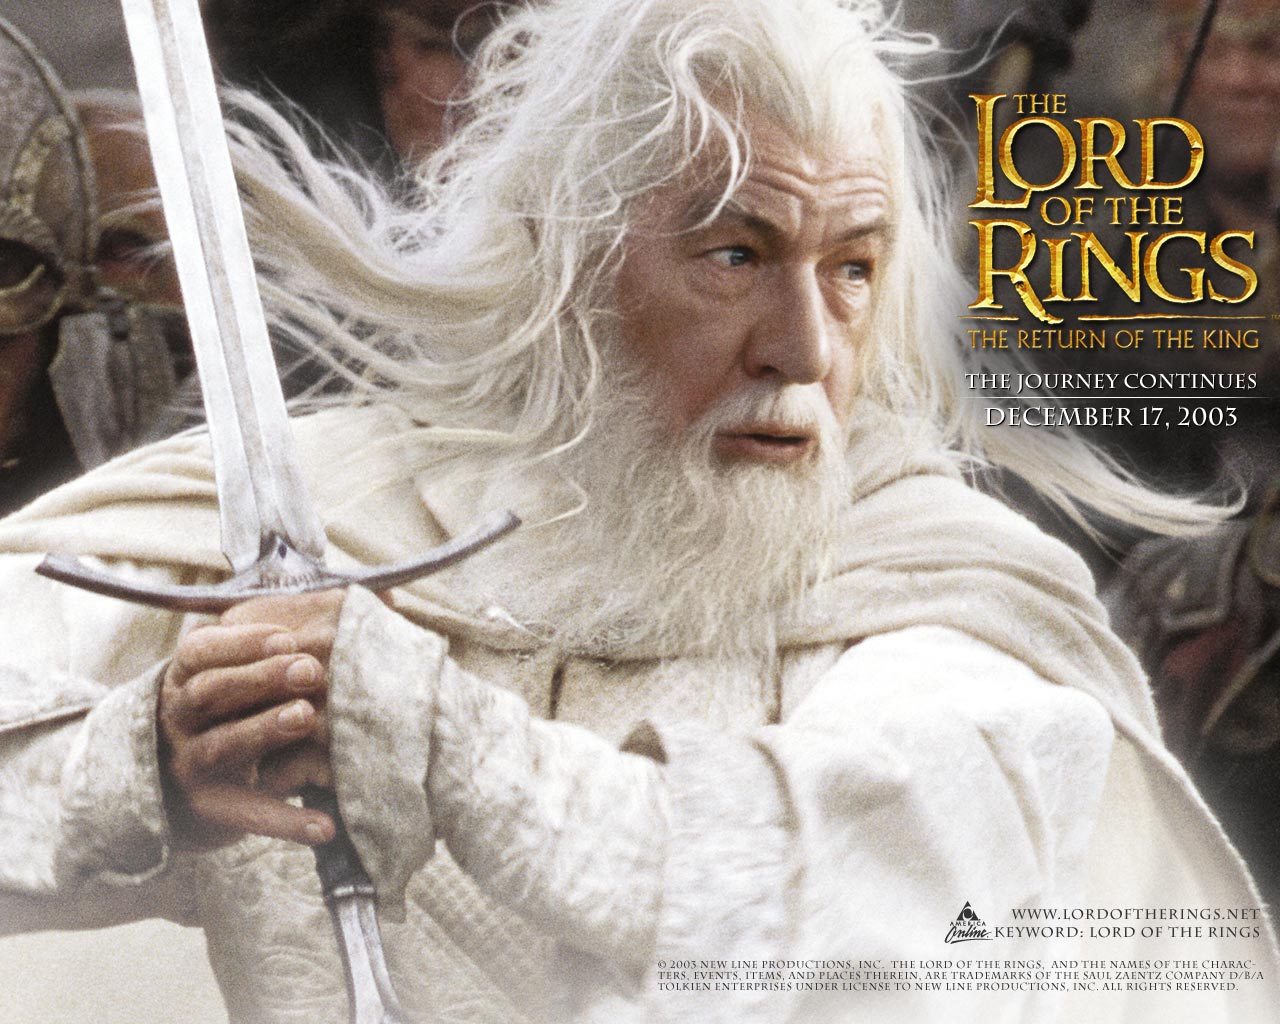 Download High quality Lord Of The Rings wallpaper / Movies / 1280x1024